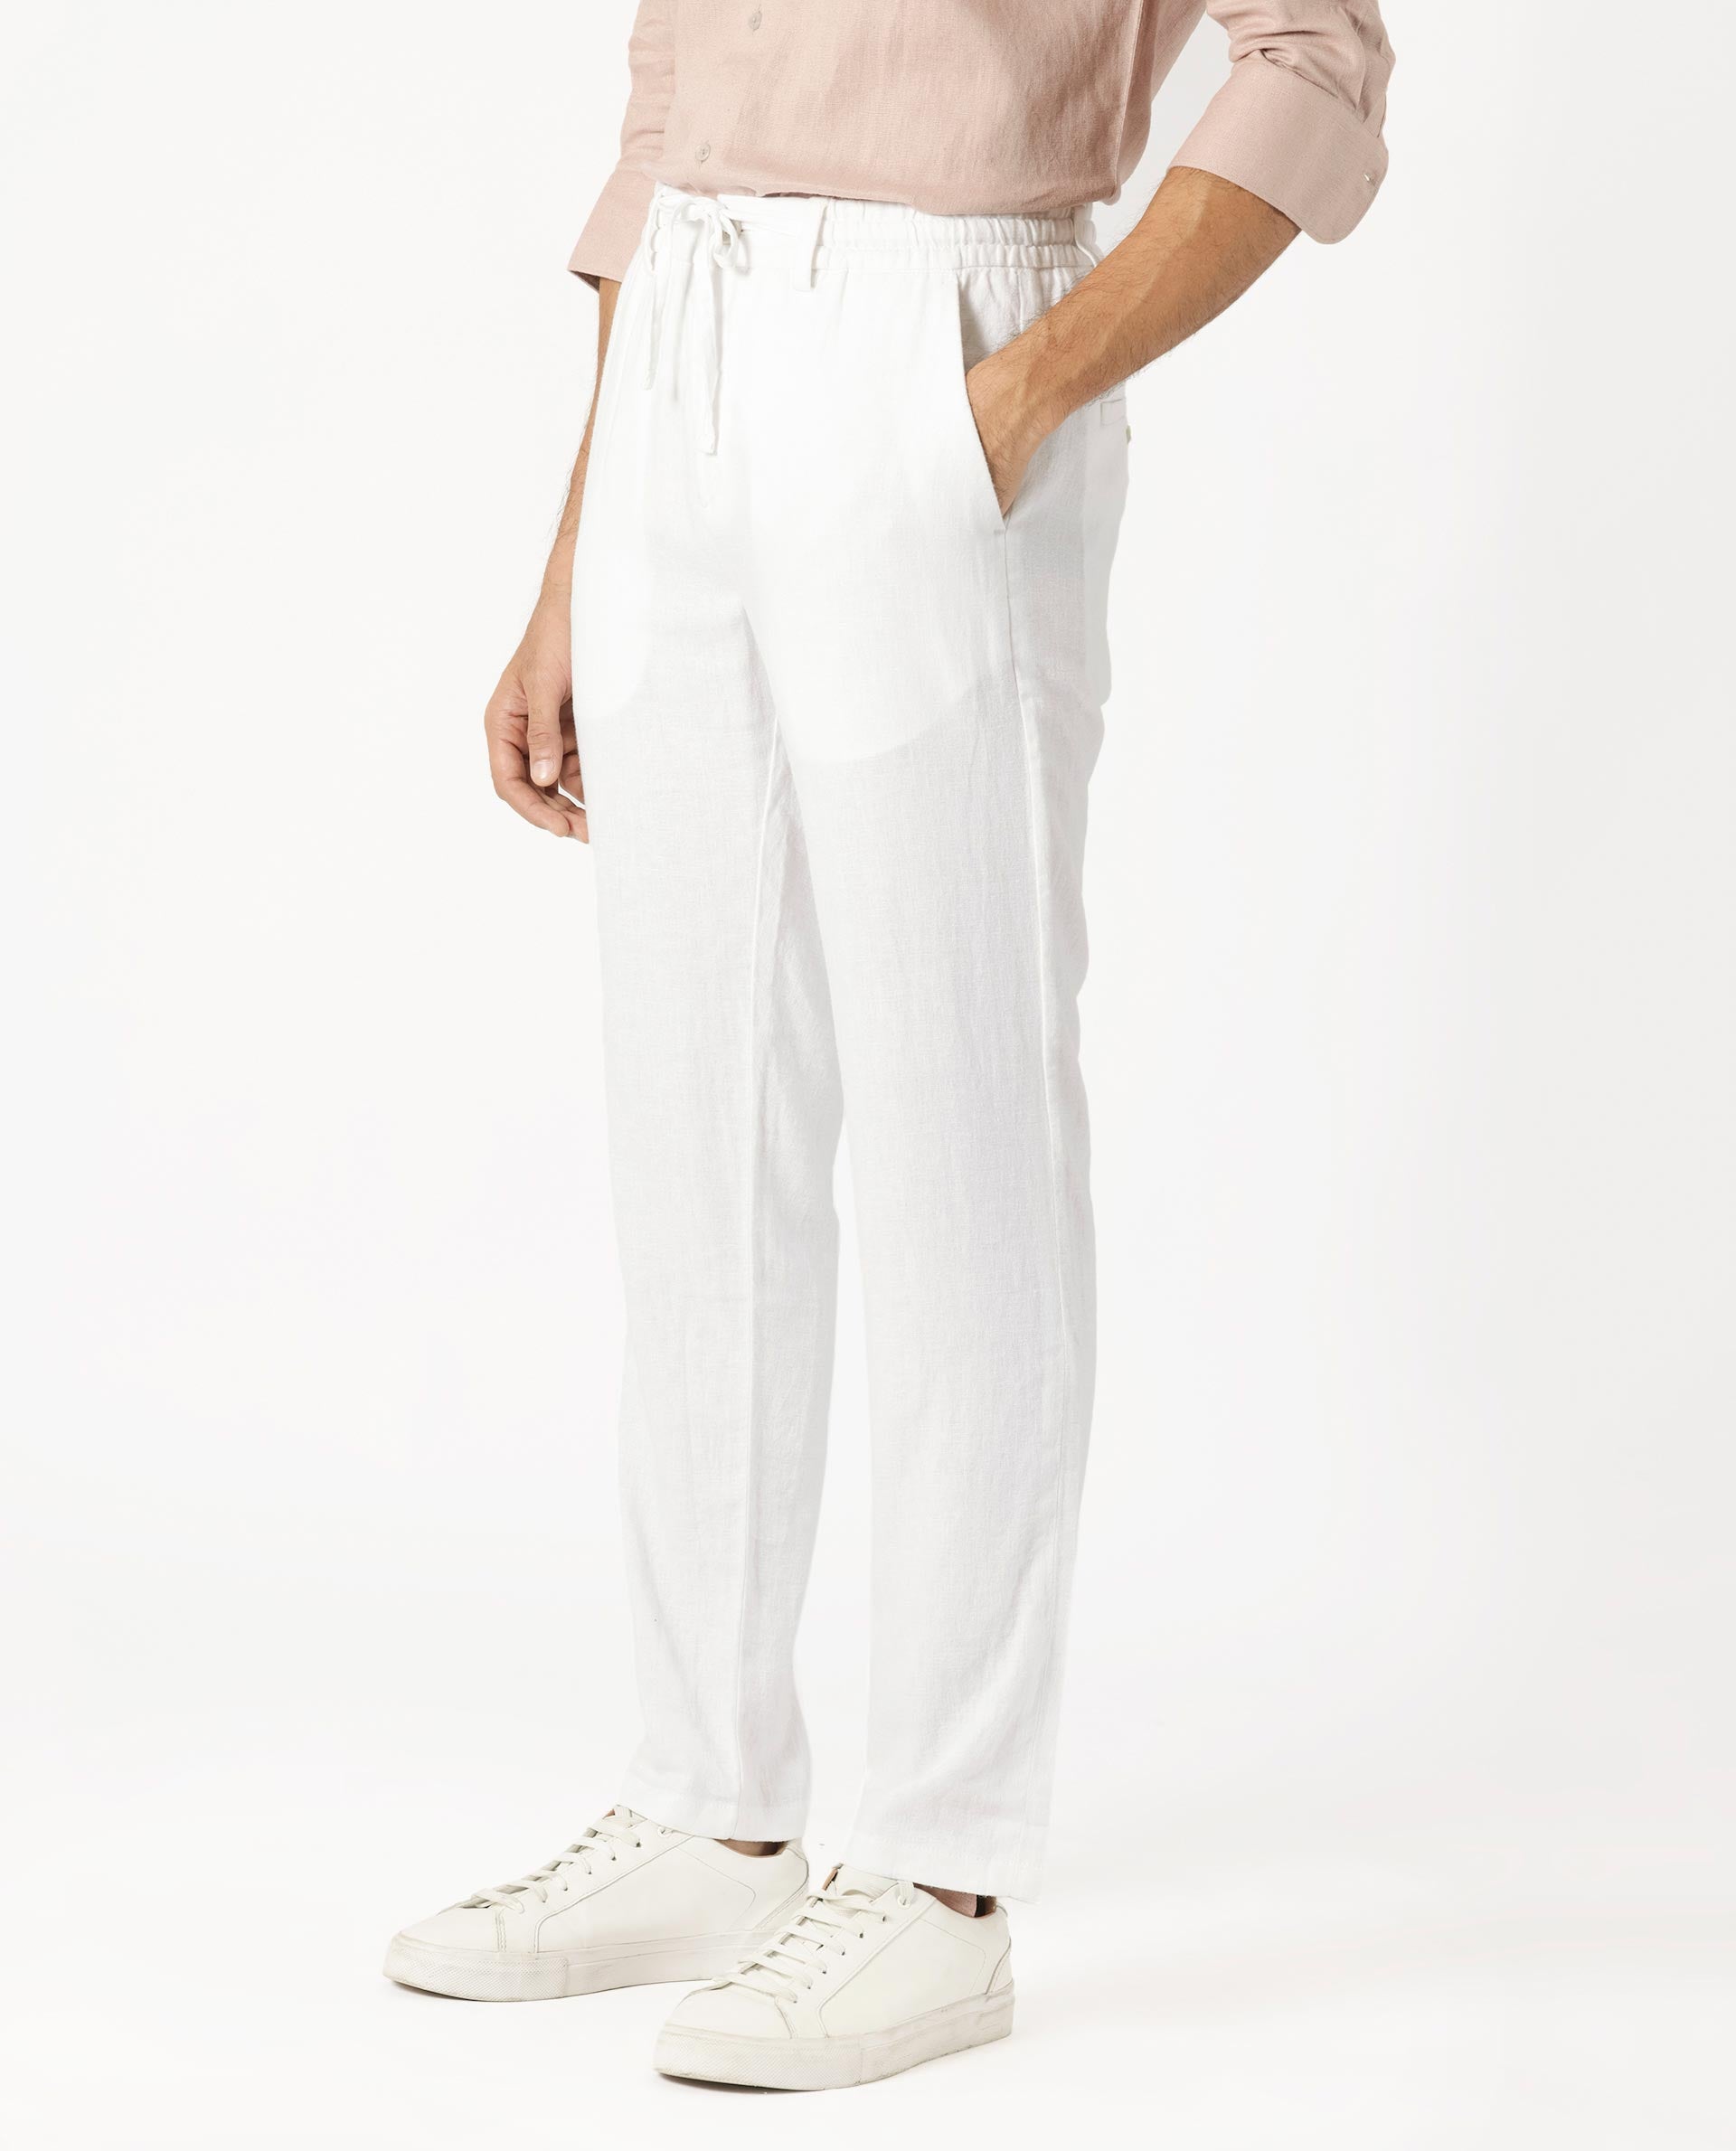 MINC - Buy Narrow Trousers in Off White Linen with Drawstring Online